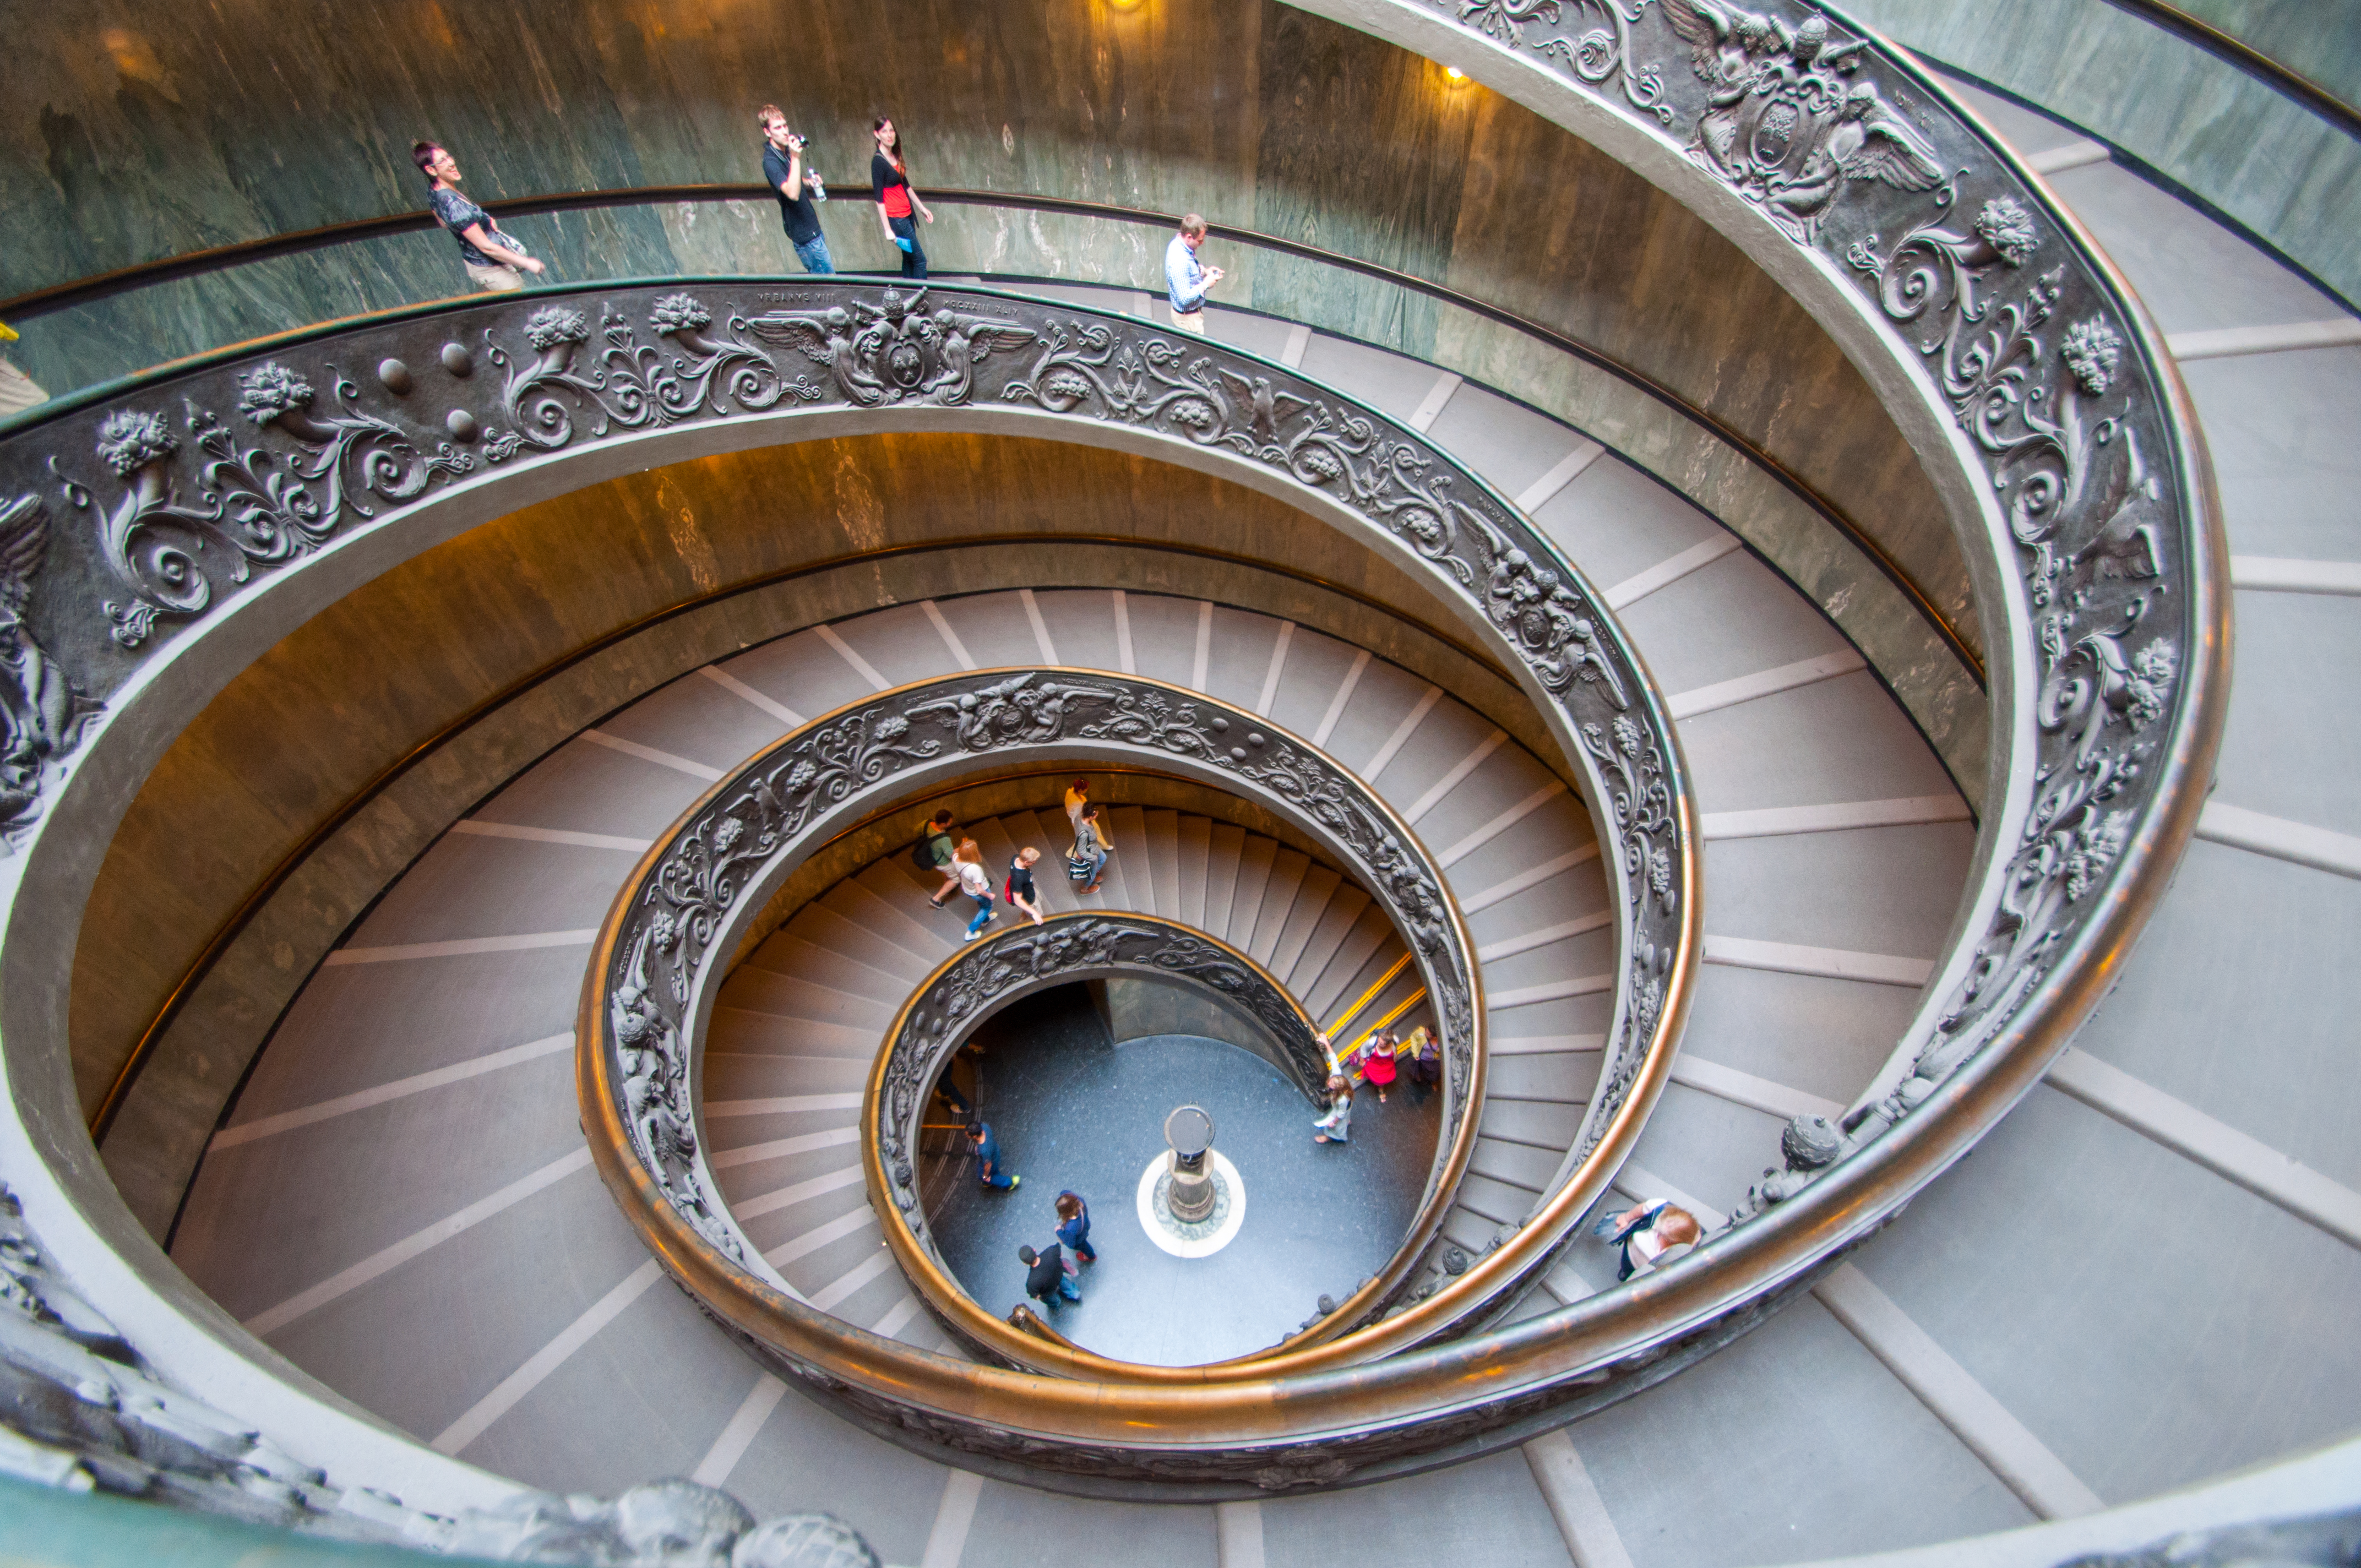 Spiral stairs in Rome